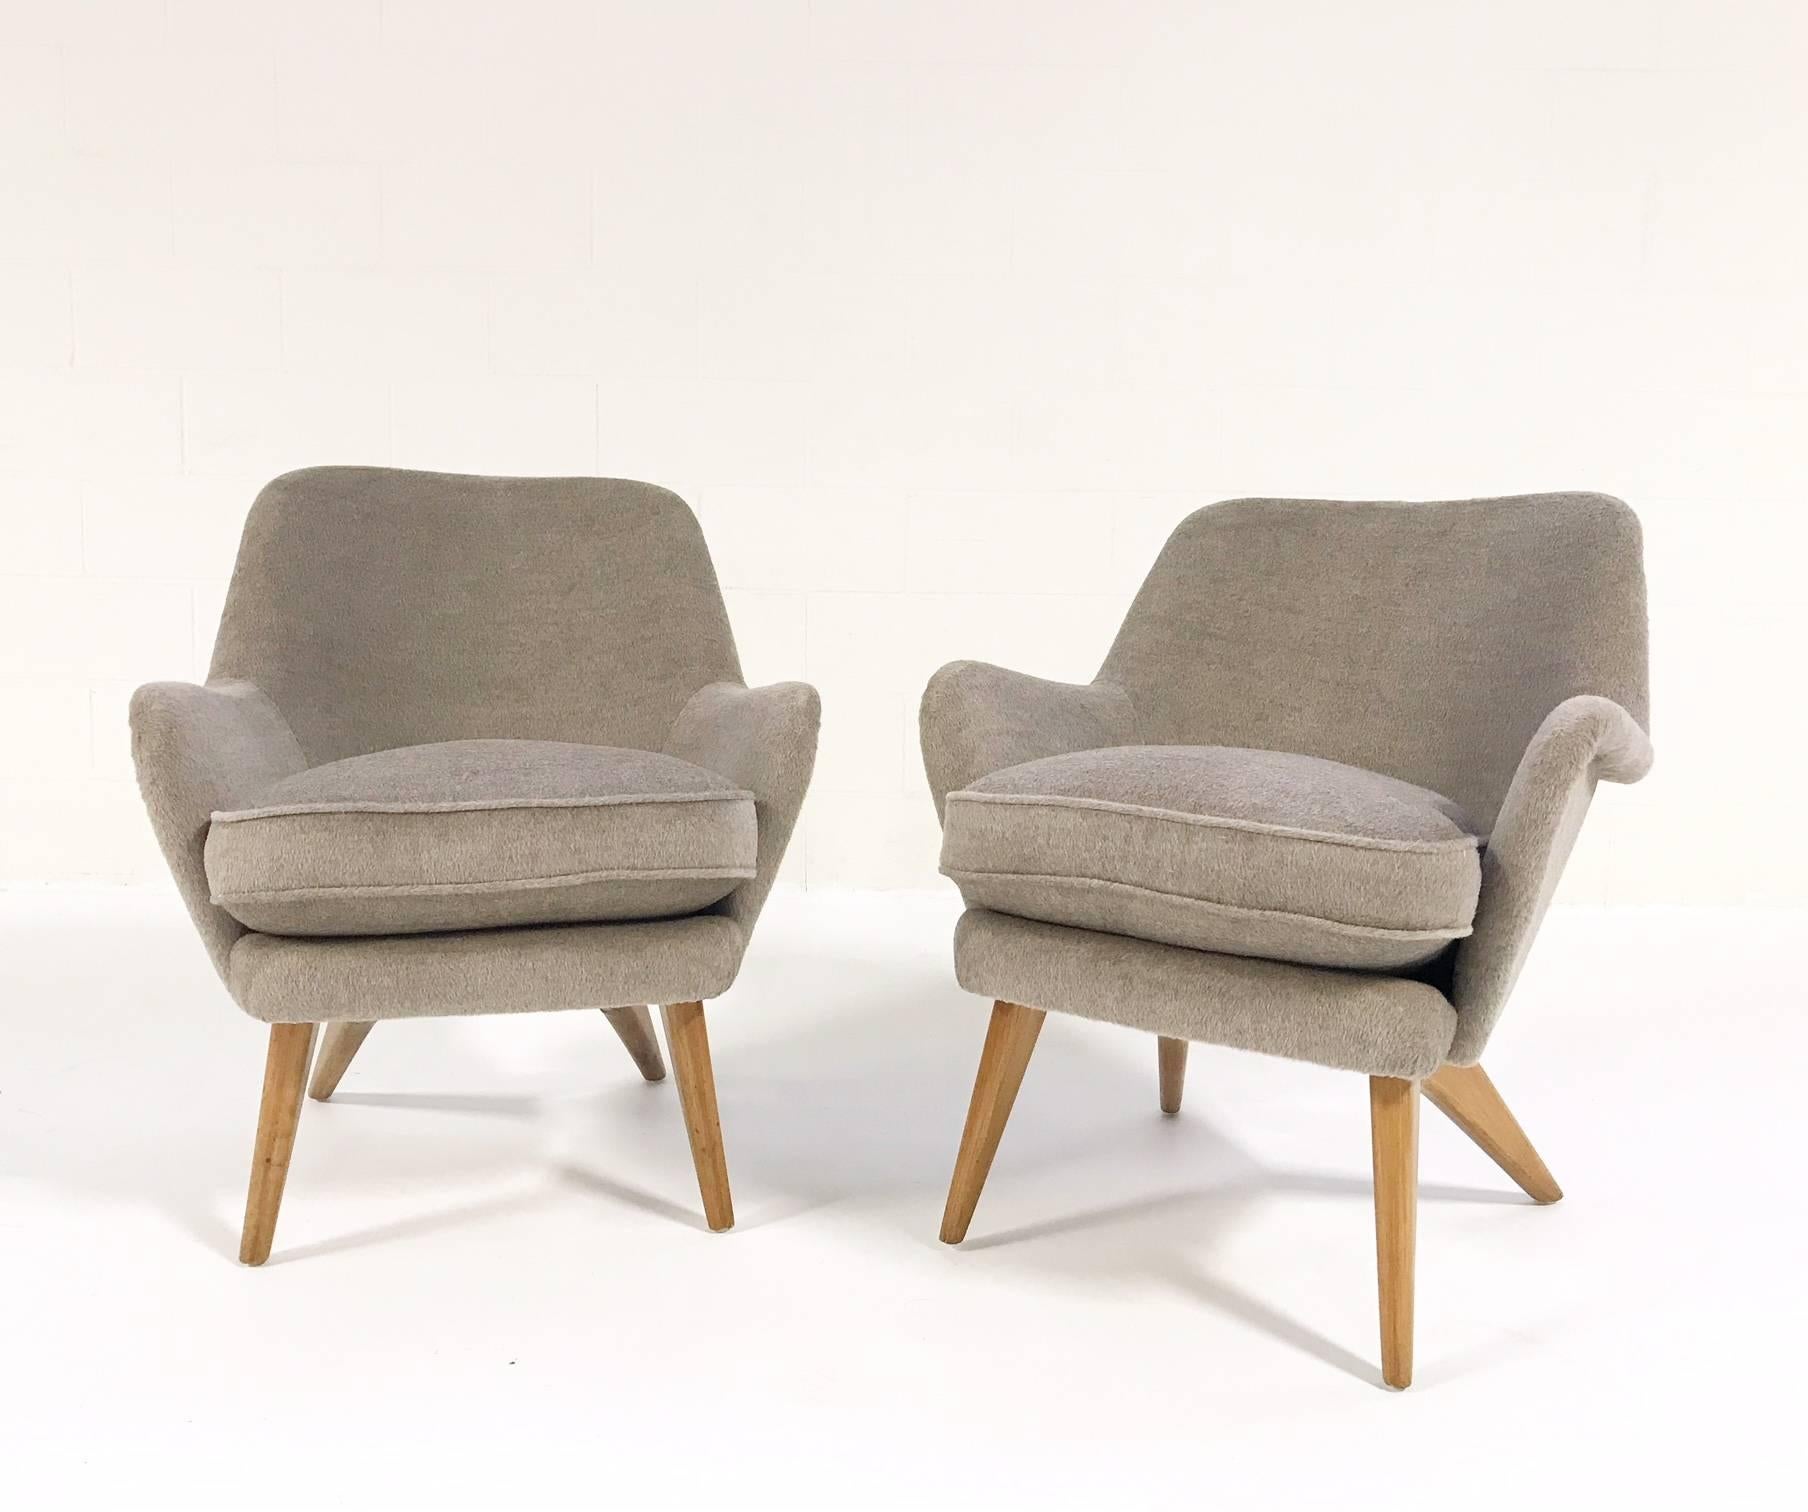 The Pedro armchair by Carl-Gustav Hiort af Ornas. Made in Finland, circa 1950. With its outward pointing curved legs, this sculptural armchair offers a striking and elegant silhouette. During his career, Carl Gustaf Hiort af Ornas developed